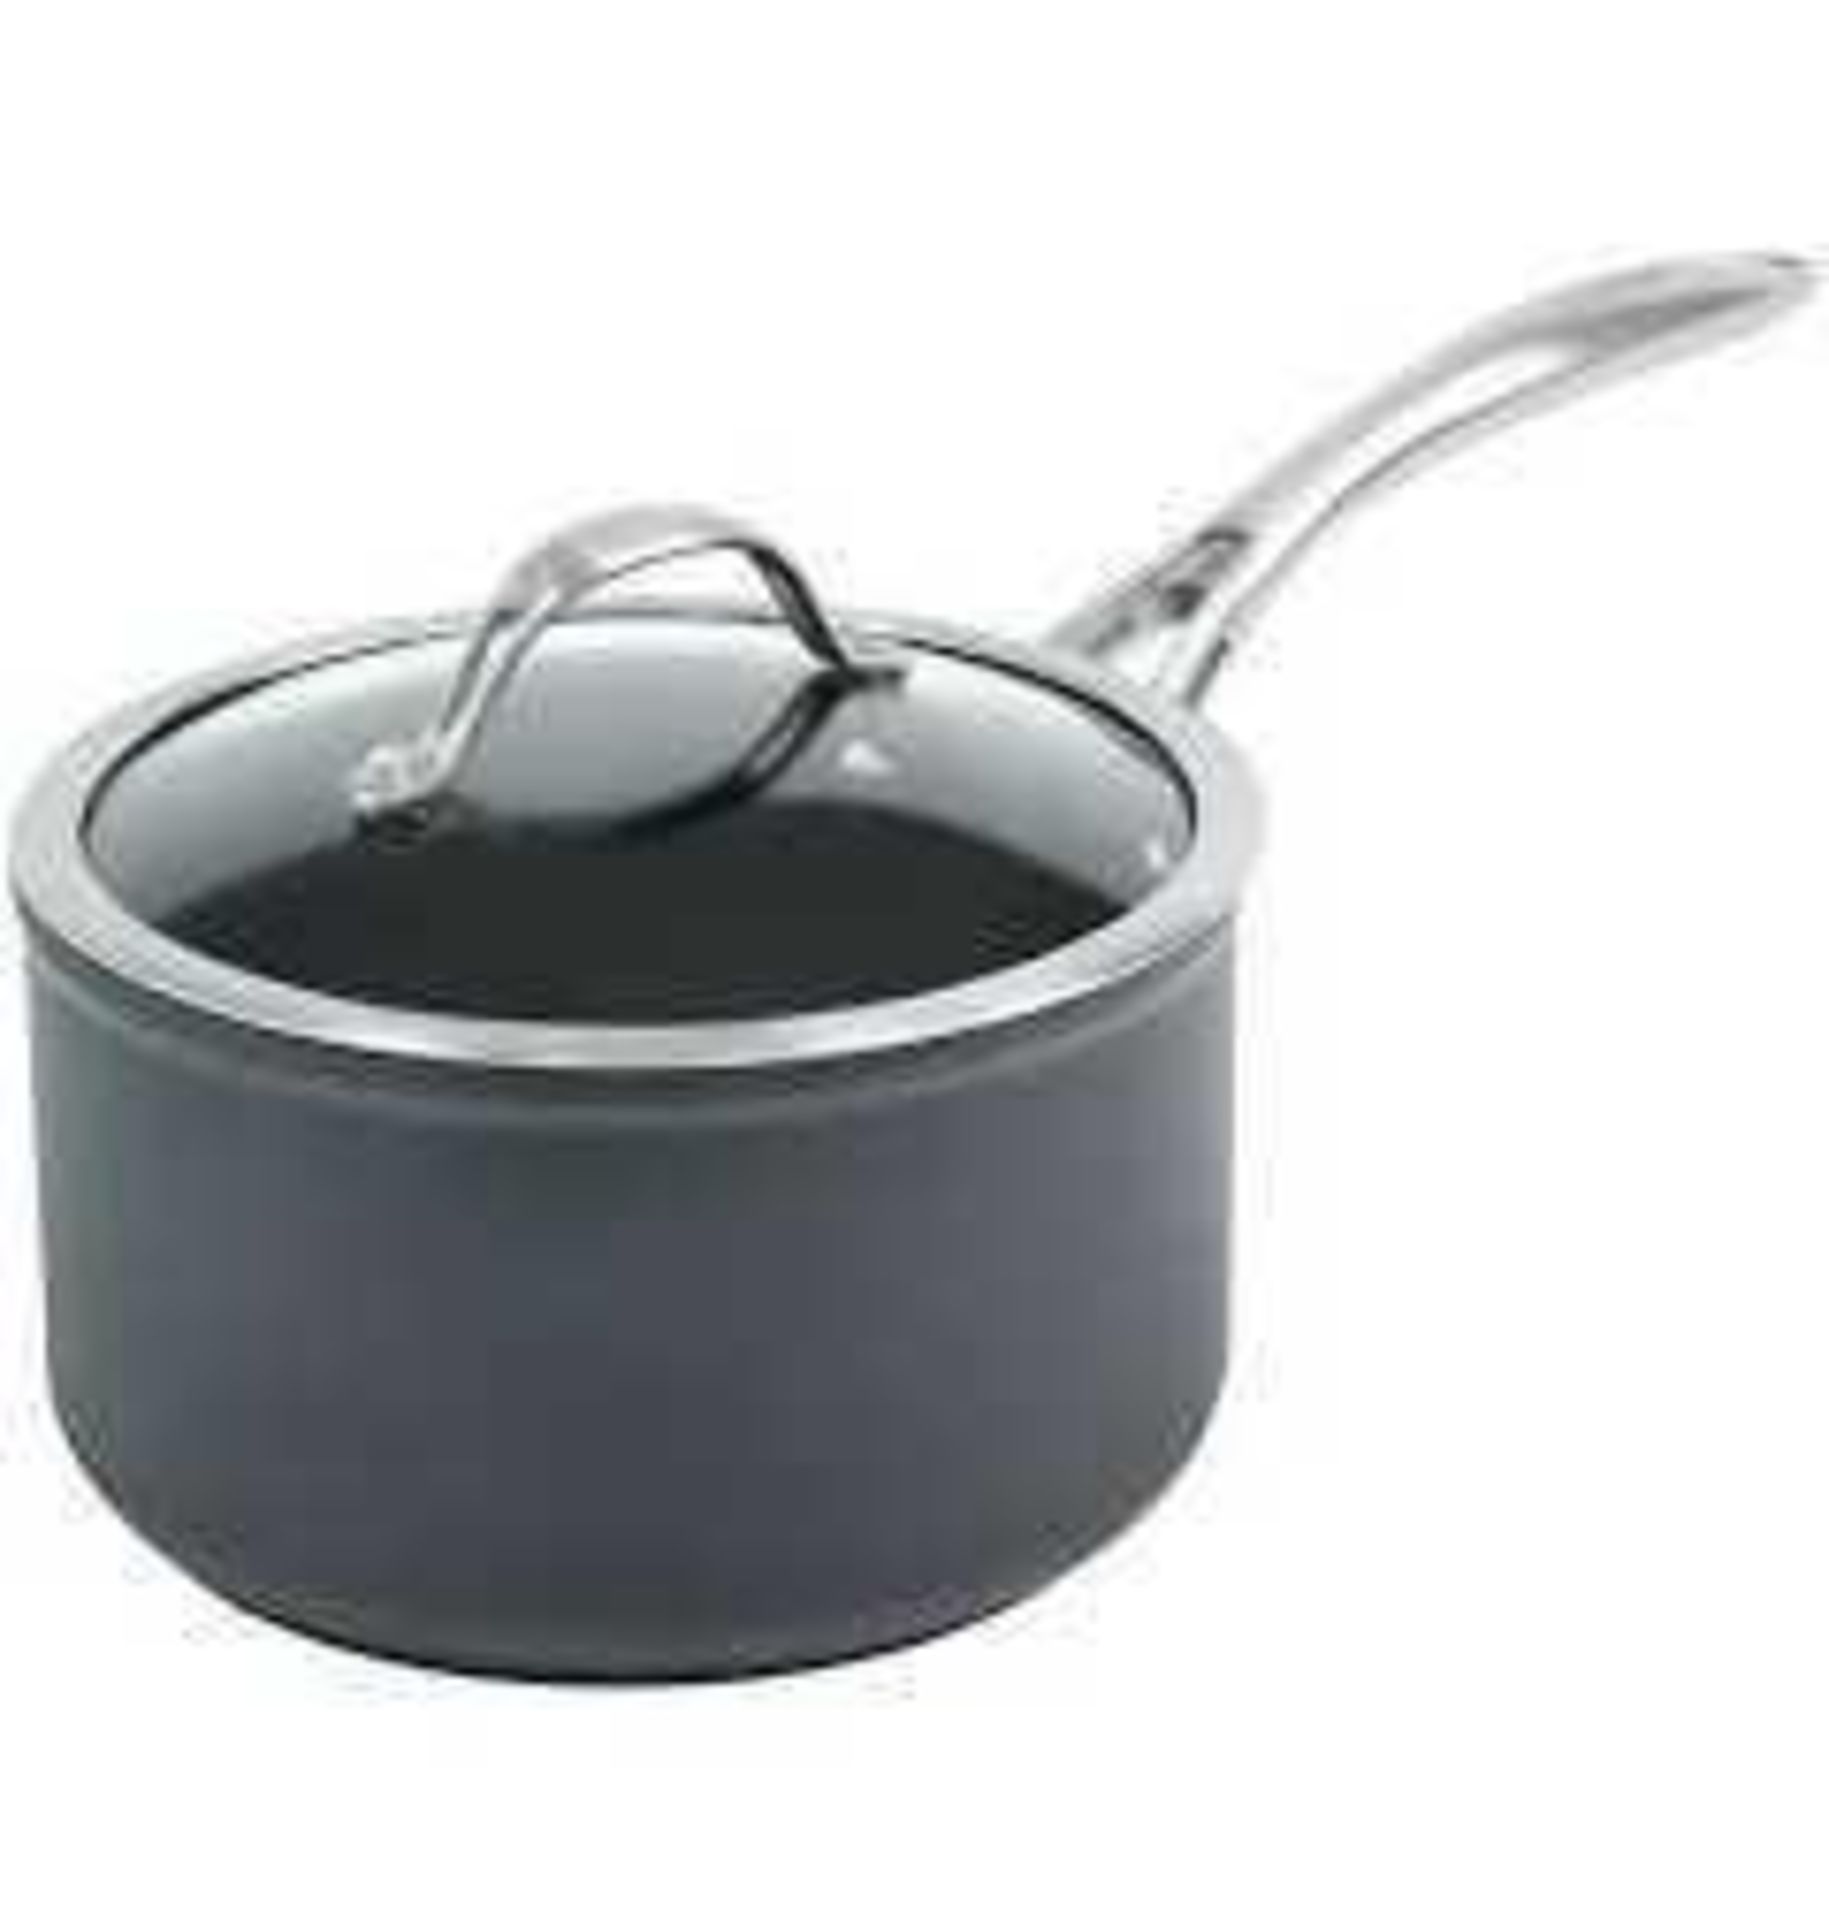 (At) RRP £395 Lot To Contain 1 X John Lewis Stockpot With Lid 1 X John Lewis SautÃ© Pan With Lid 1 X - Image 3 of 12